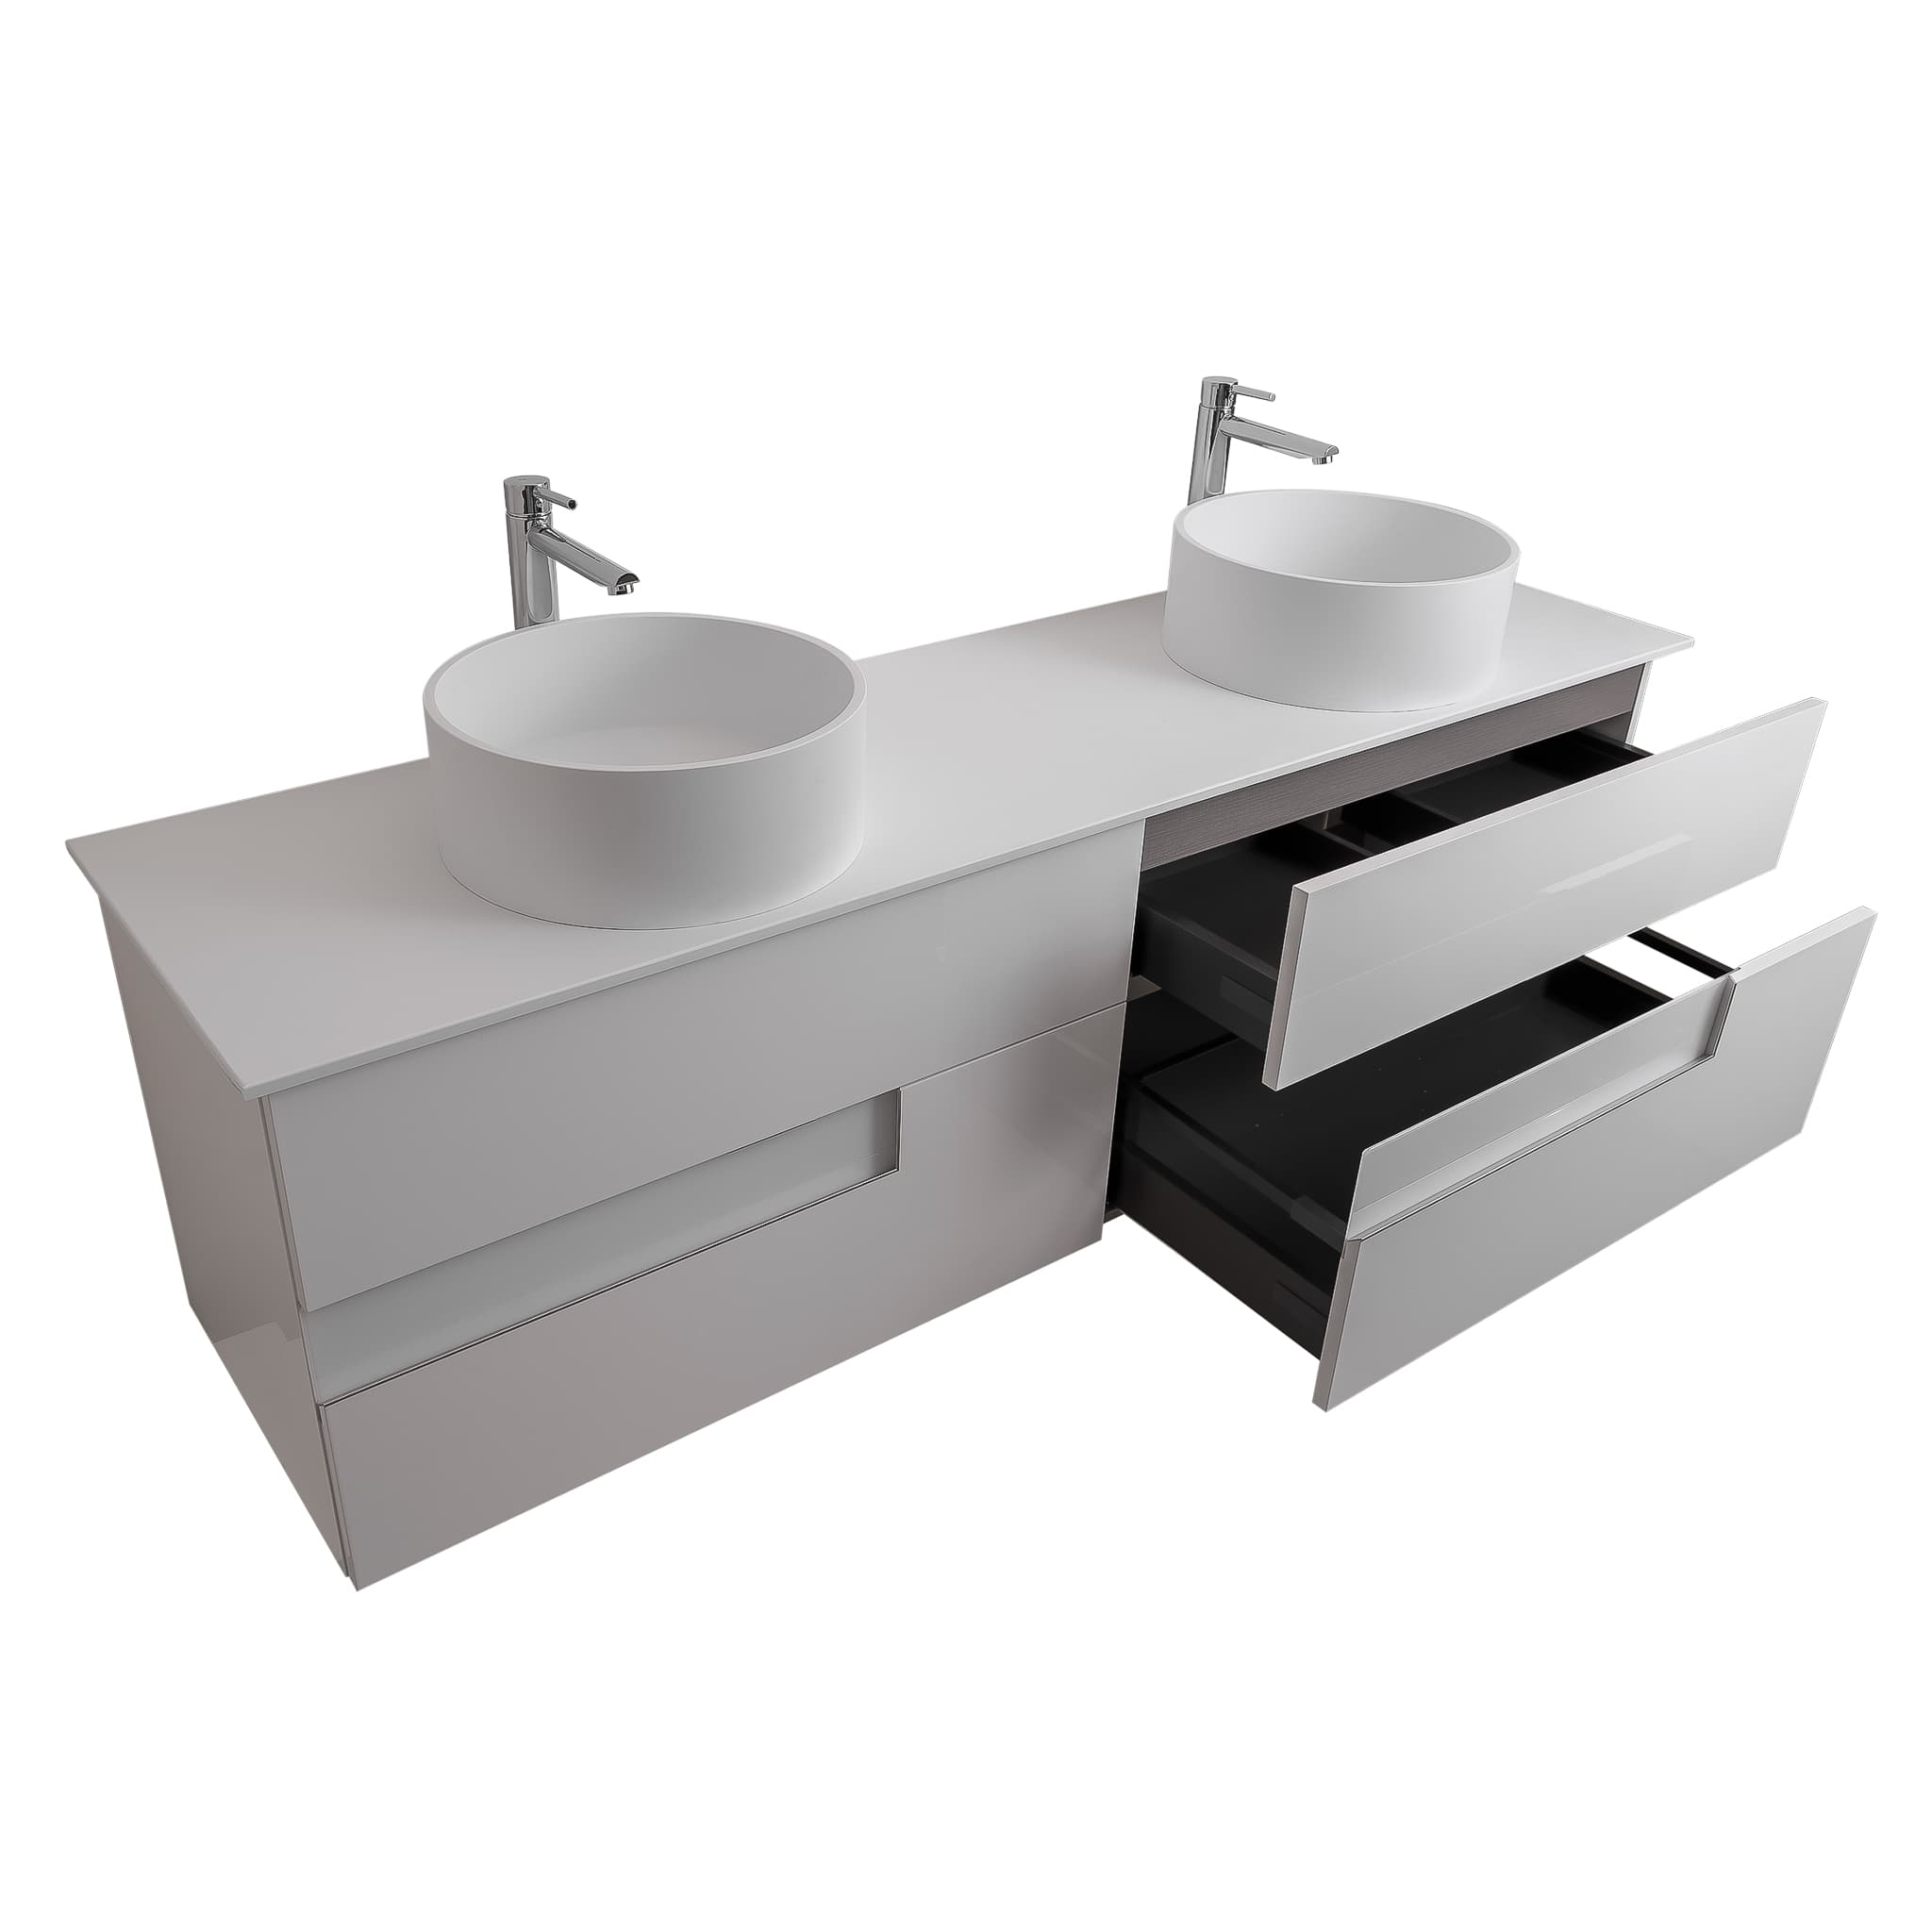 Vision 63 White High Gloss Cabinet, Solid Surface Flat White Counter And Two Round Solid Surface White Basin 1386, Wall Mounted Modern Vanity Set